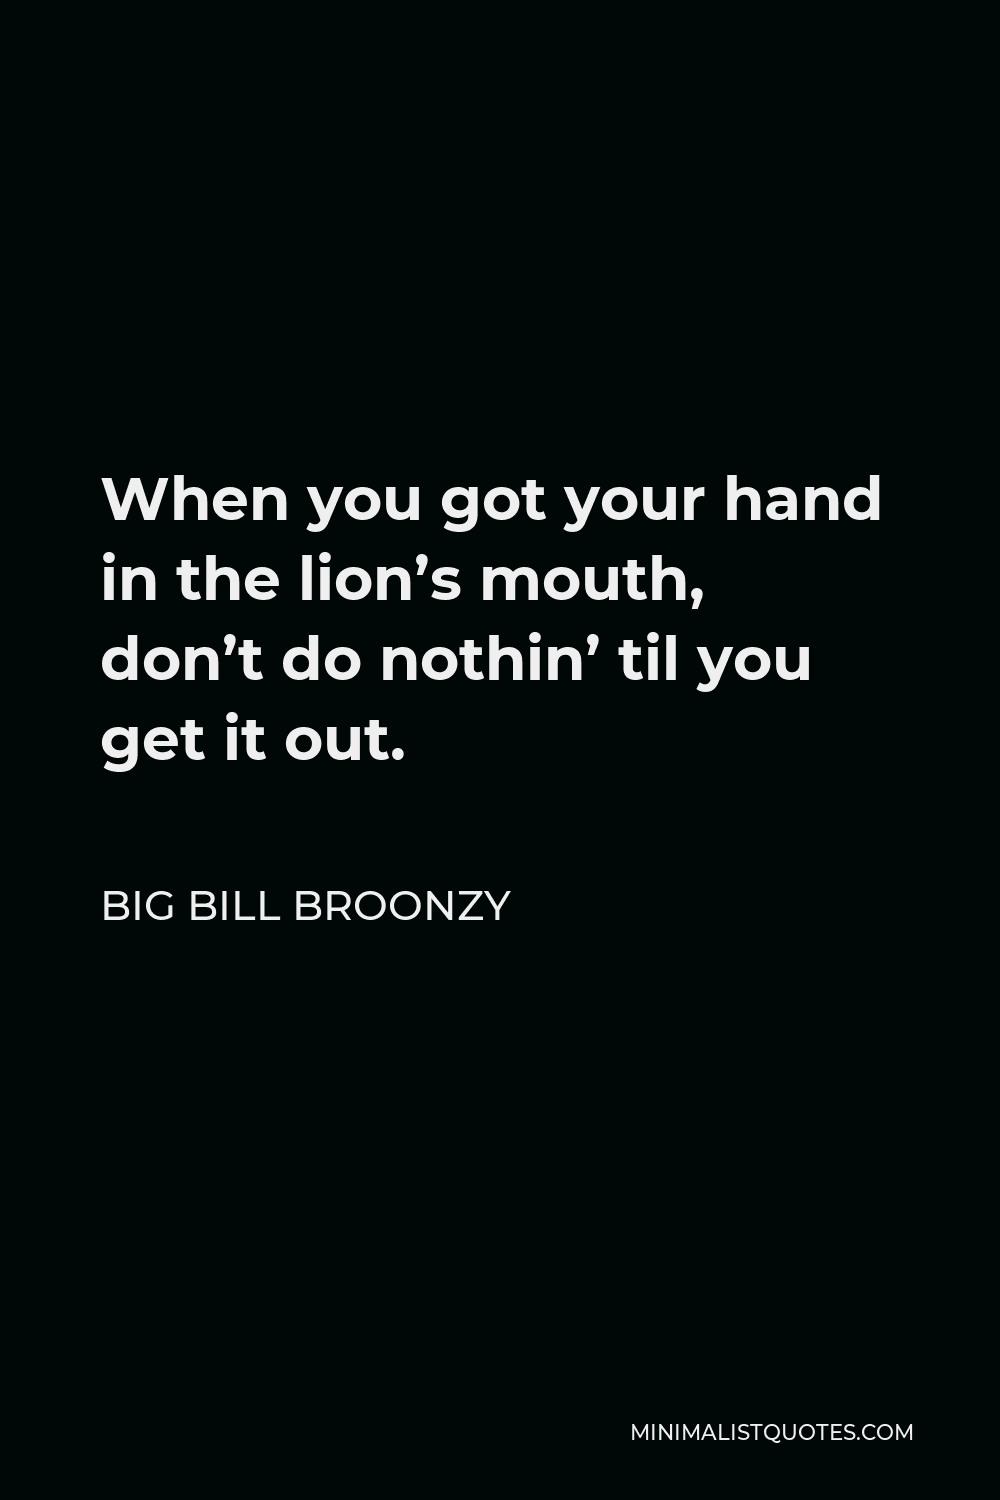 Big Bill Broonzy Quote - When you got your hand in the lion’s mouth, don’t do nothin’ til you get it out.